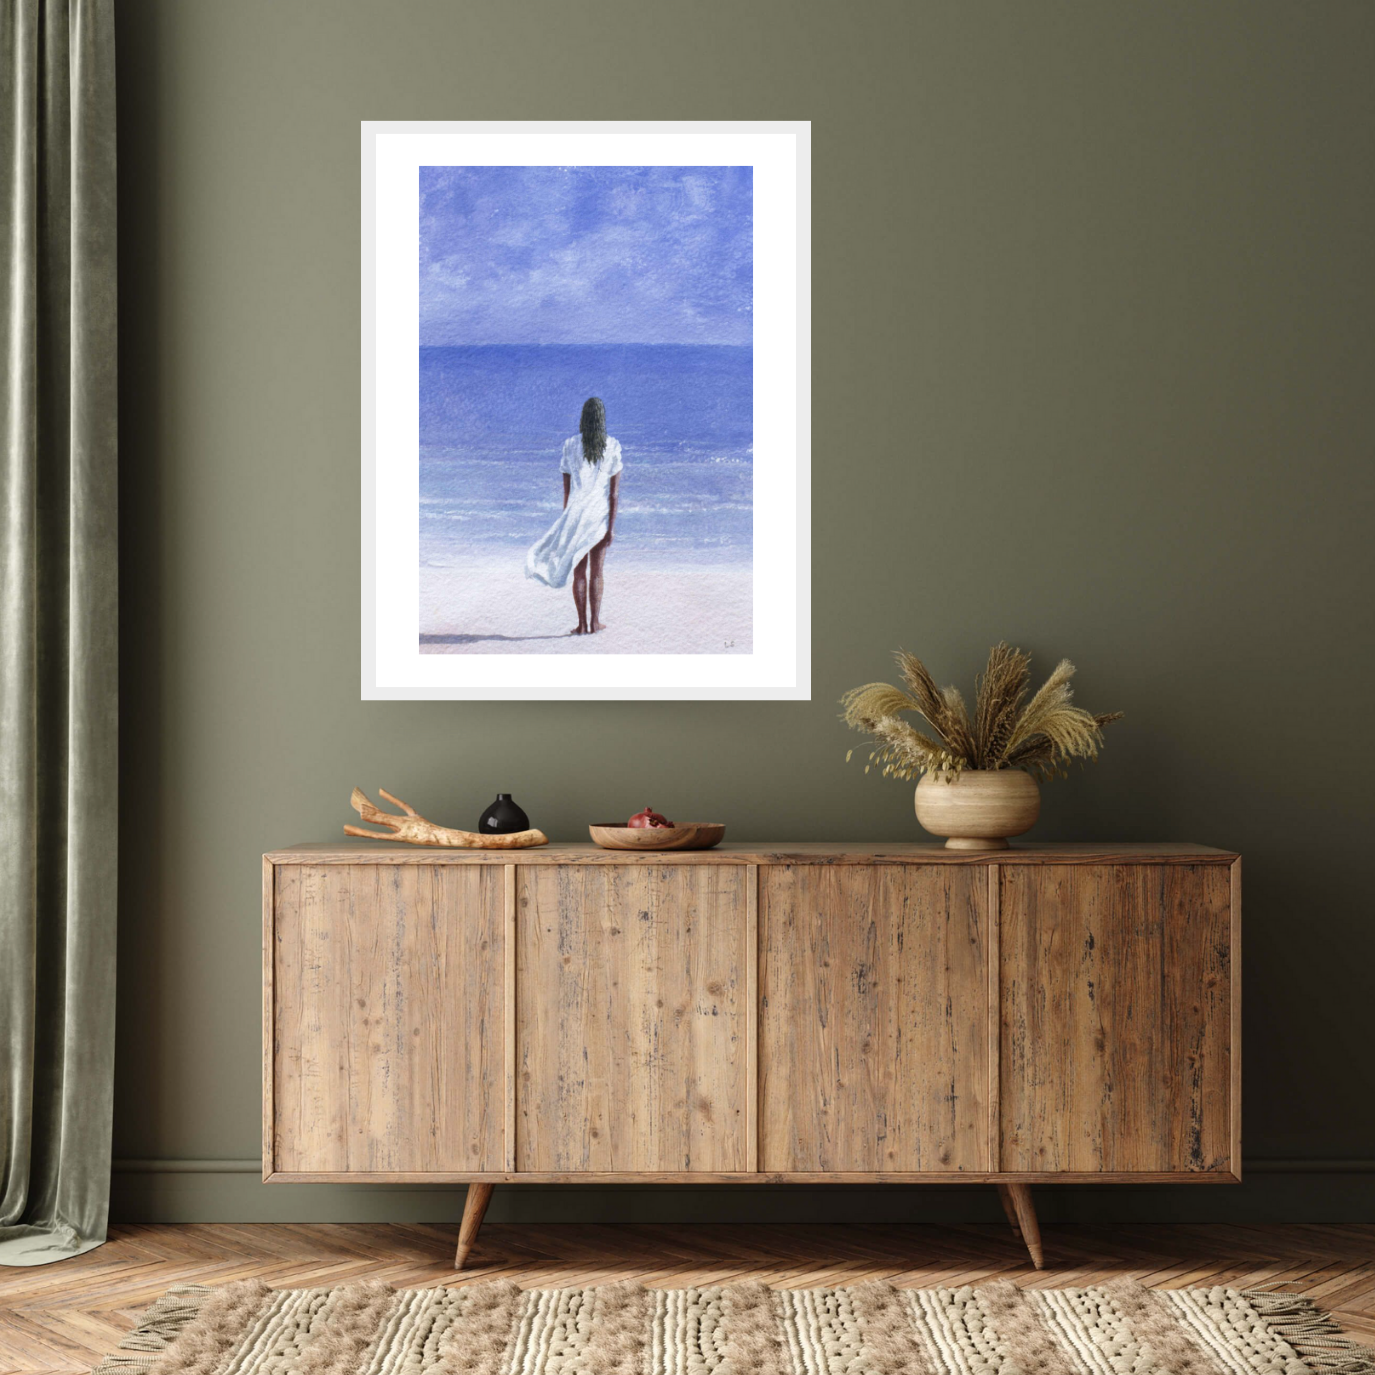 "Girl on Beach, 1995" by Lincoln Seligman. This captivating white framed print depicts a woman in a flowing white dress standing on the pristine sands, gazing towards the azure waters. Bring the tranquillity of the seaside into your space with this archival digital print on Hahnemühle German etching paper.